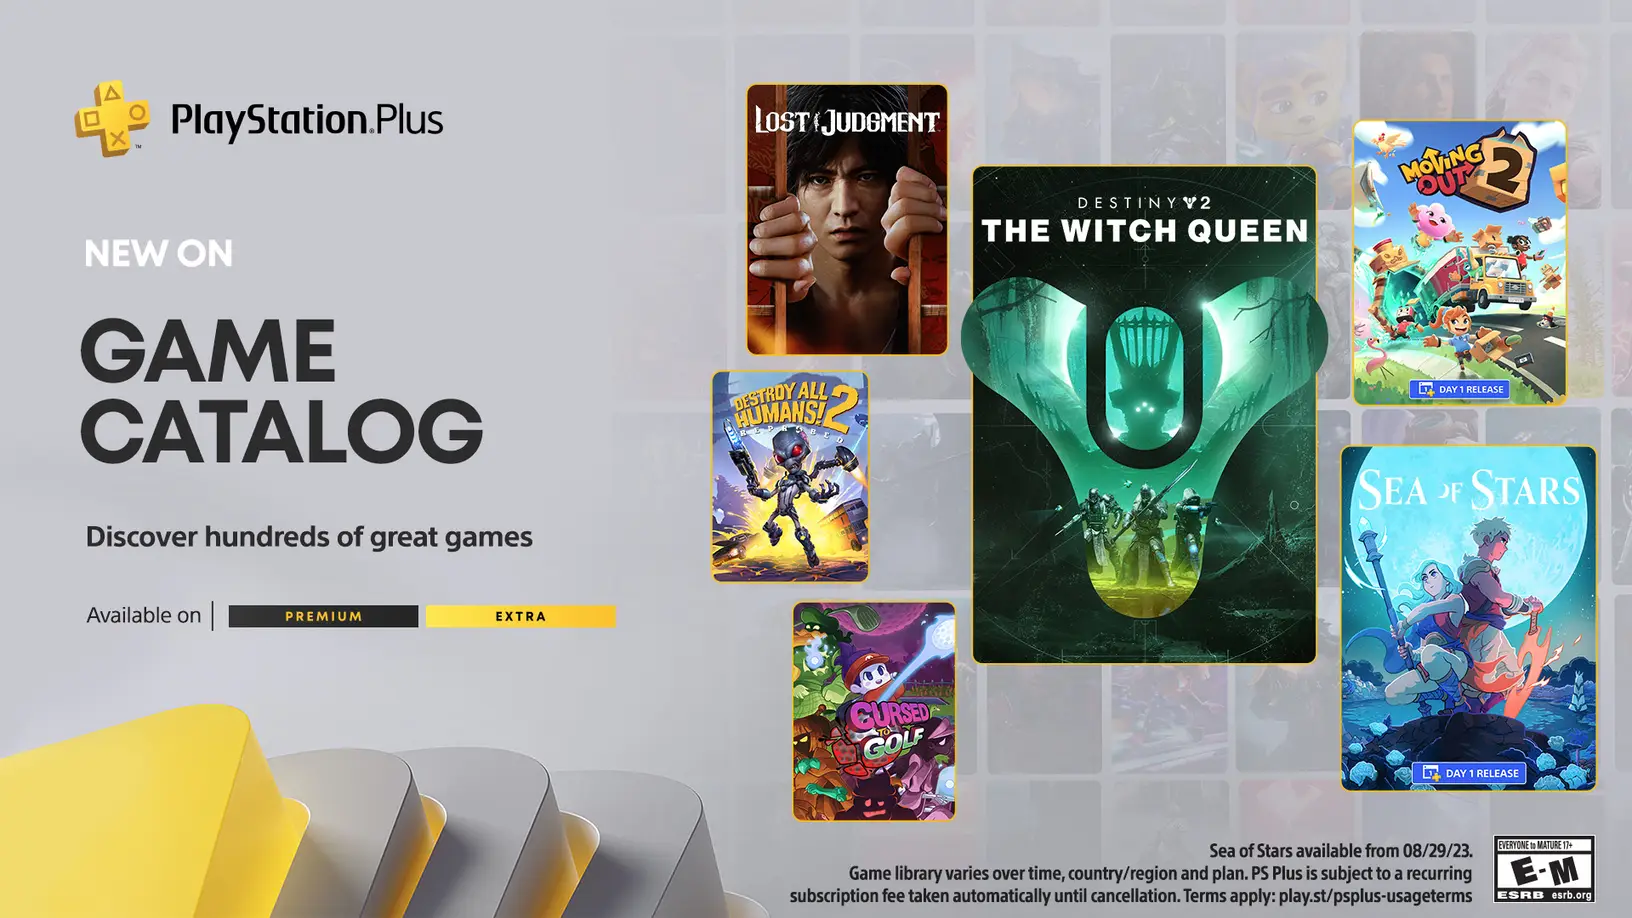 PlayStation Plus Reveals August 2023 Game Catalog Titles; Sea of Stars, Lost Judgment & More